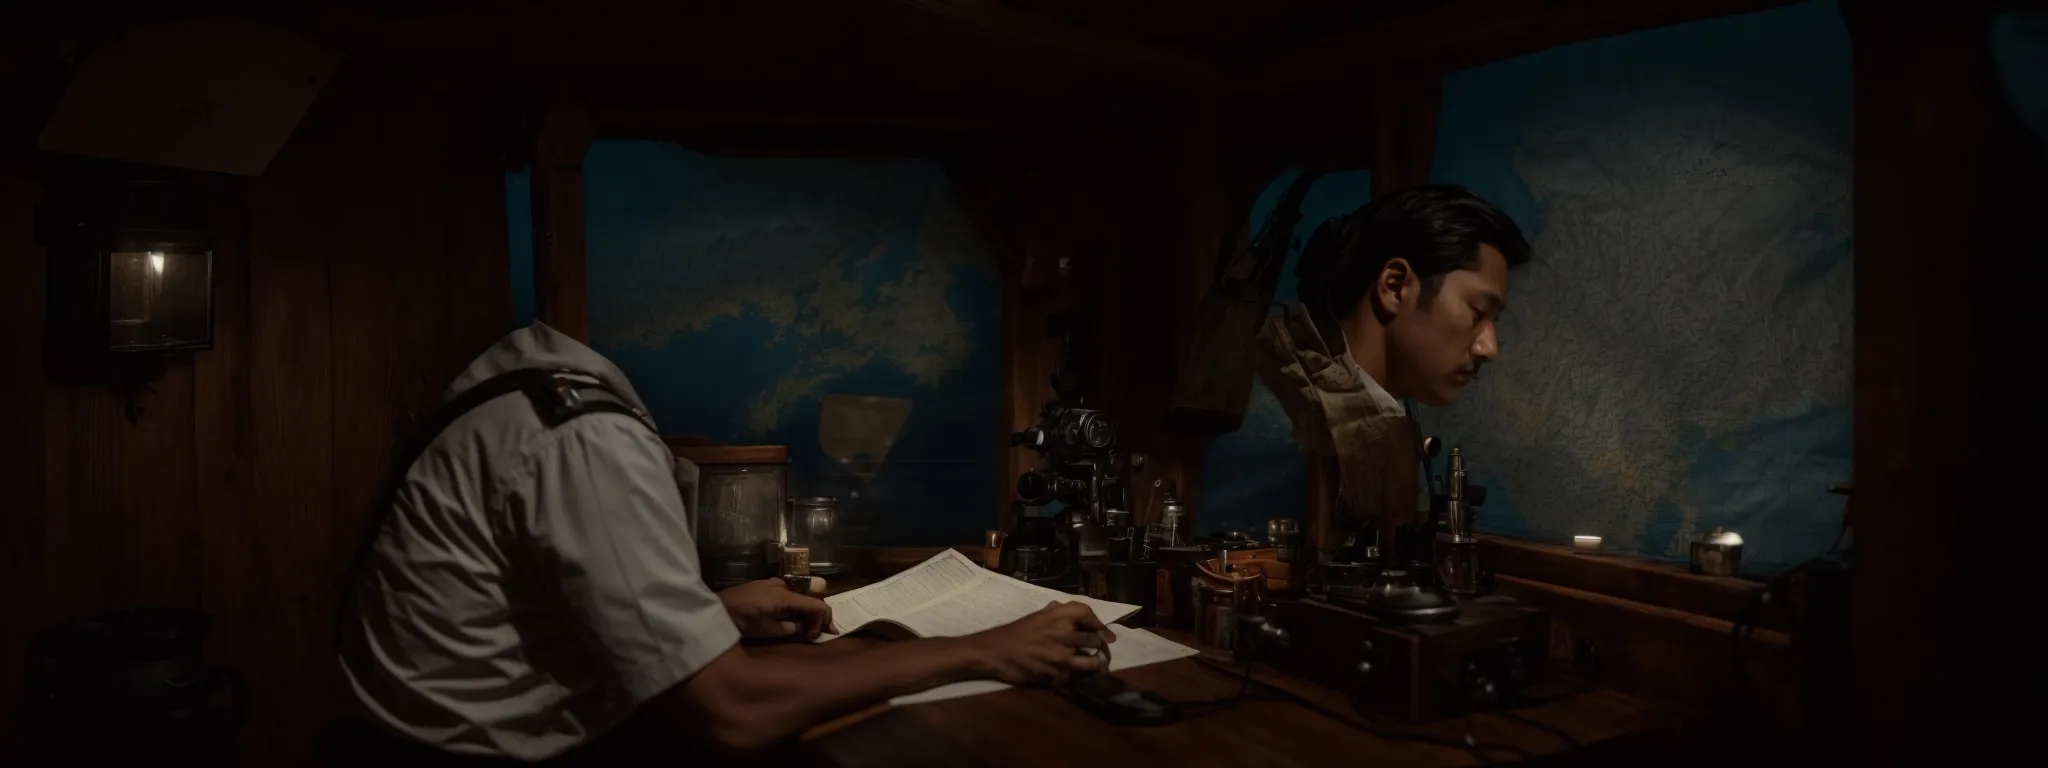 a captain at the helm of a ship, intently examining a navigational chart spread out on a wooden table under a dim cabin light.